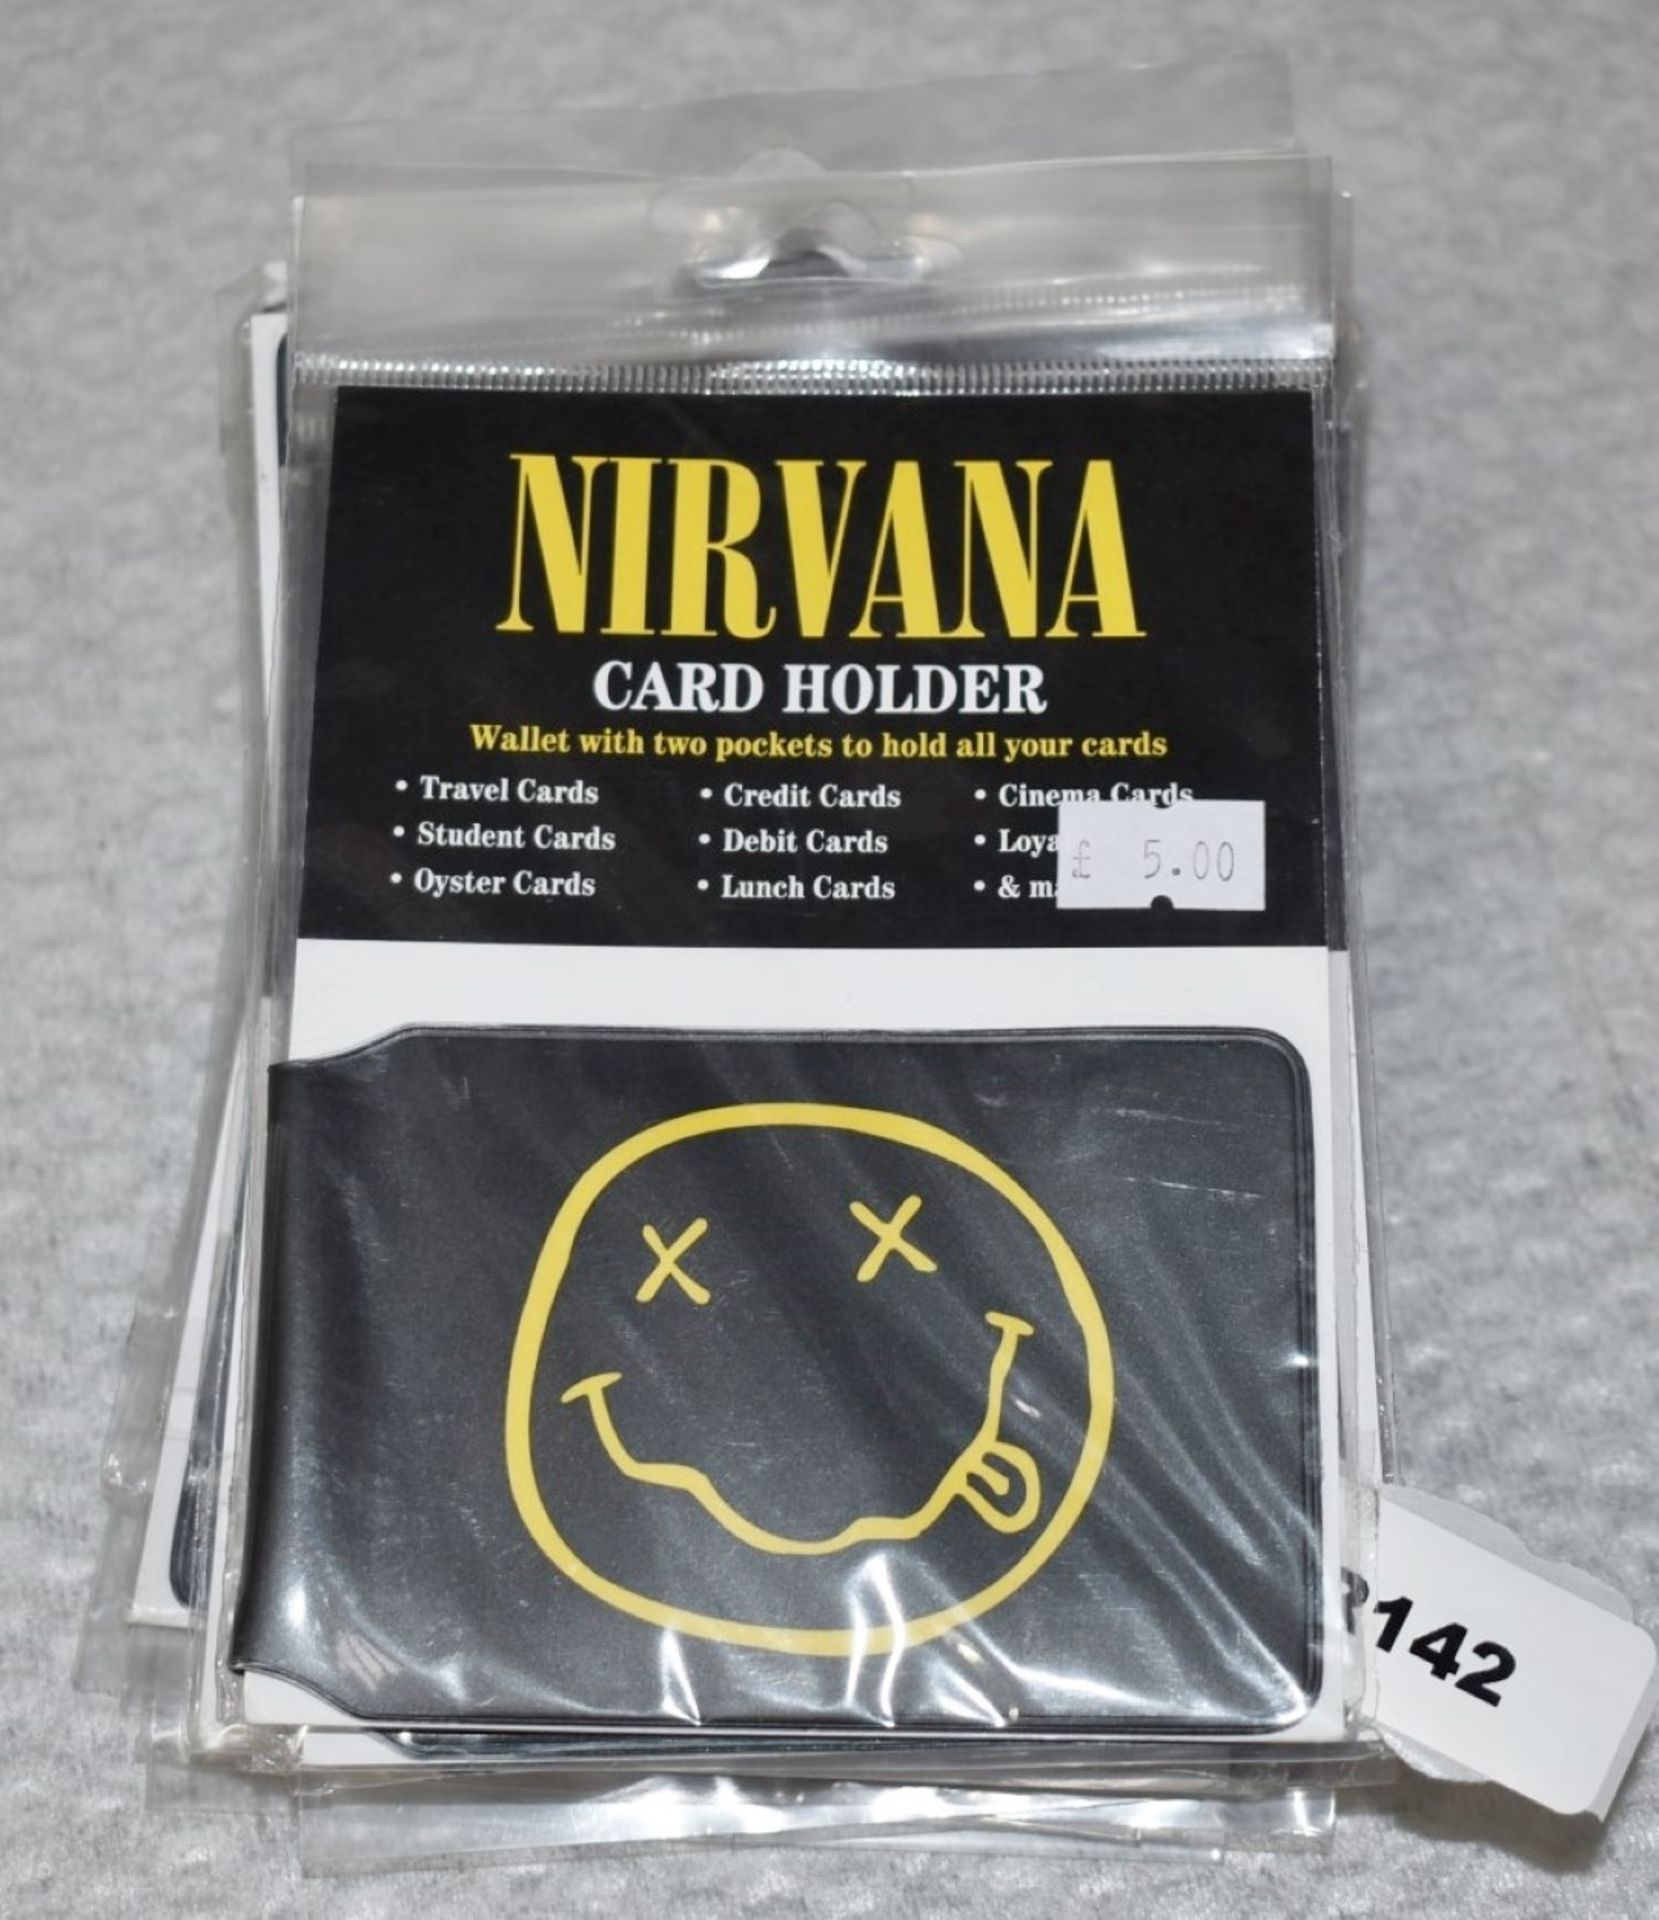 28 x Card Holder Wallets - Bowie, Nirvana, Rolling Stones, ACDC, Bob Marley, Queen - RRP £140 - Image 4 of 11